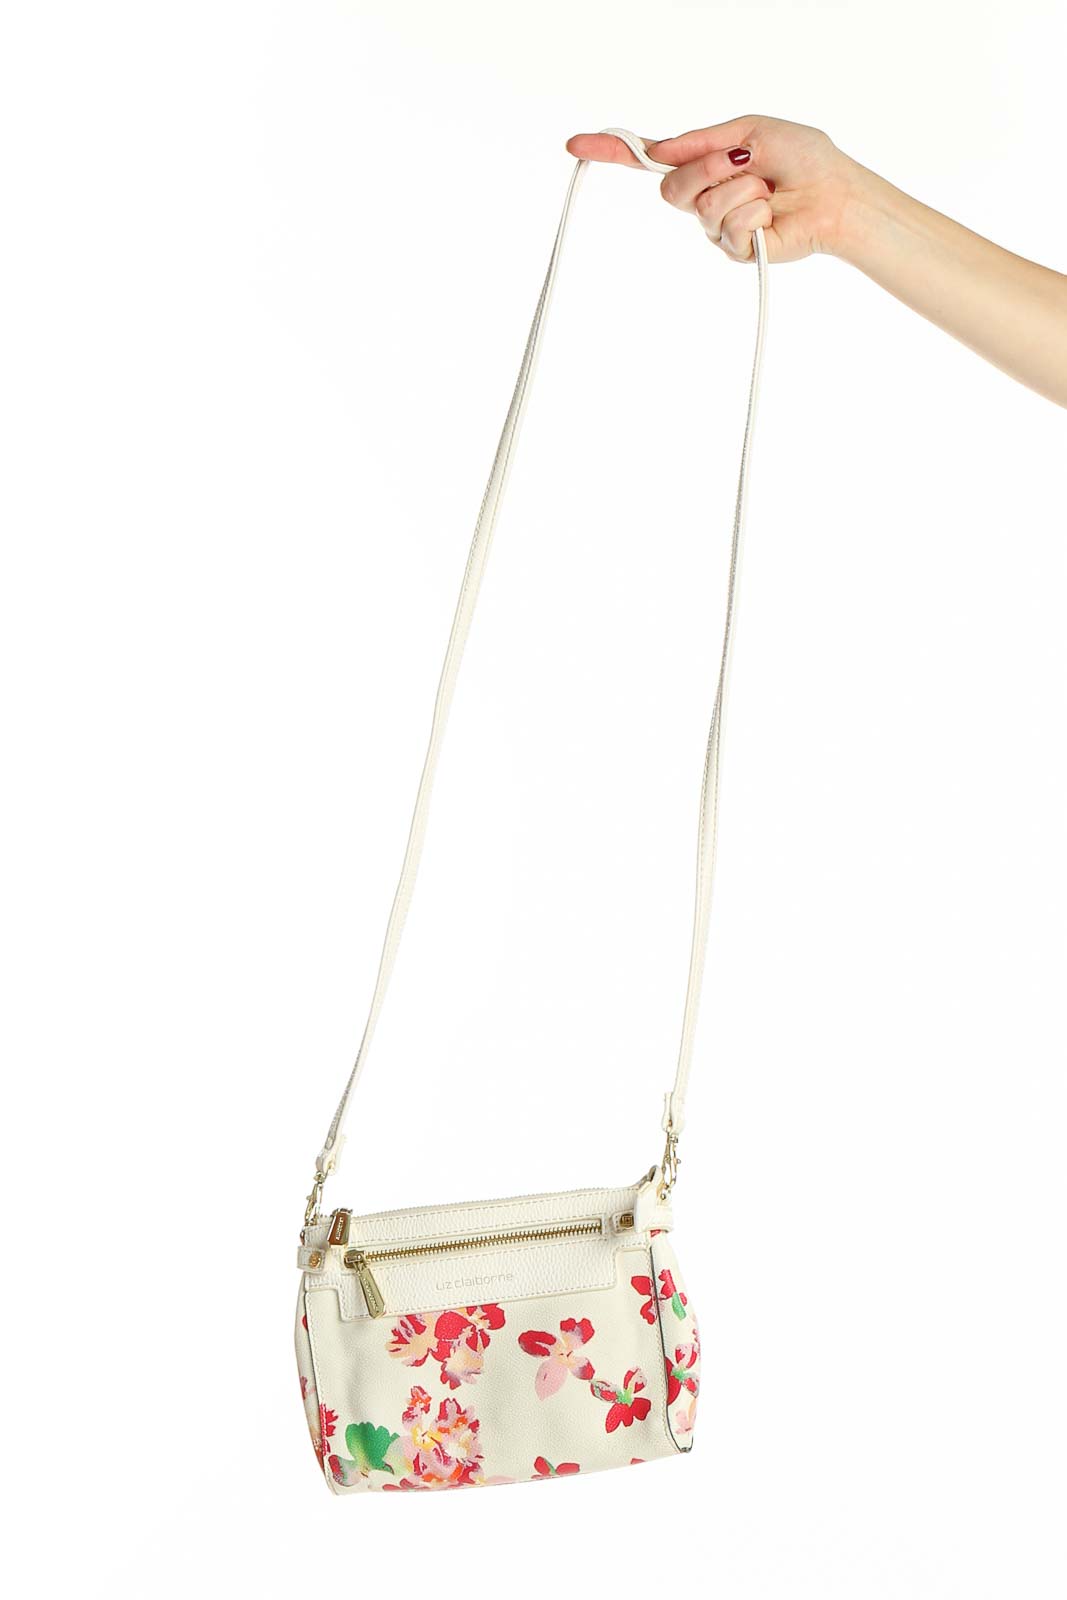 White Floral Print Crossbody Bag Front